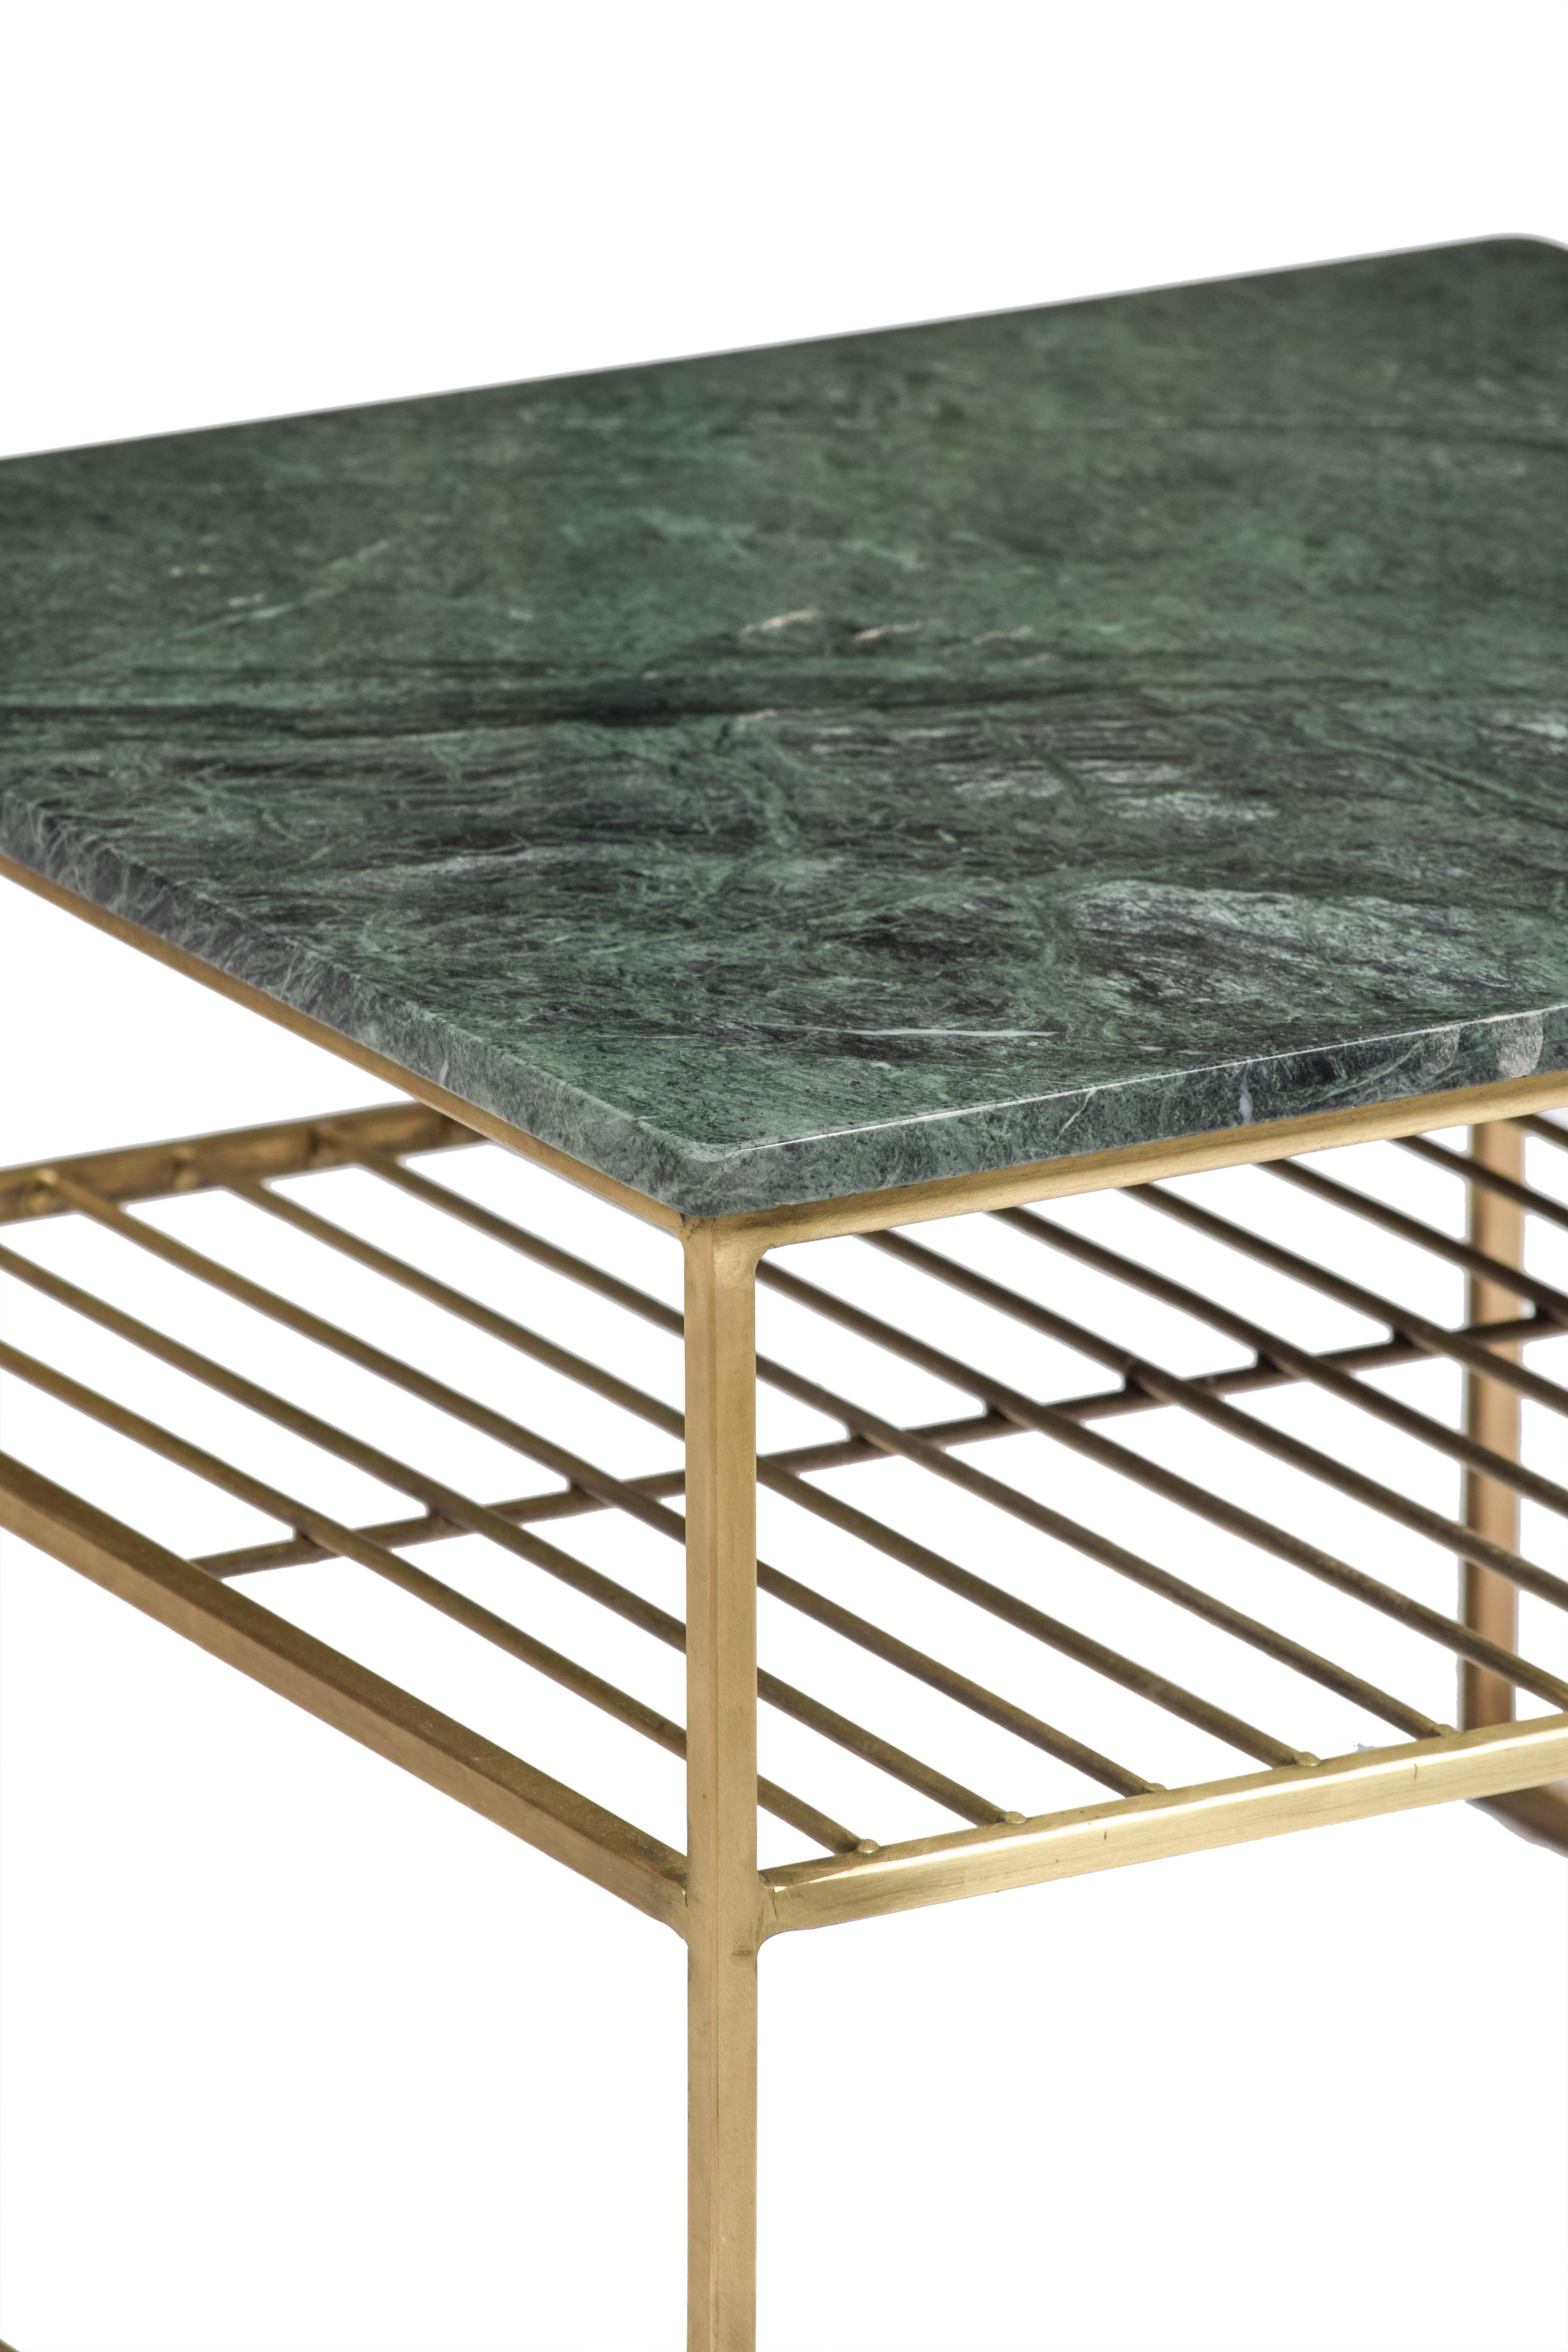 Dian Marble Green Gold 55cm afbeelding 3